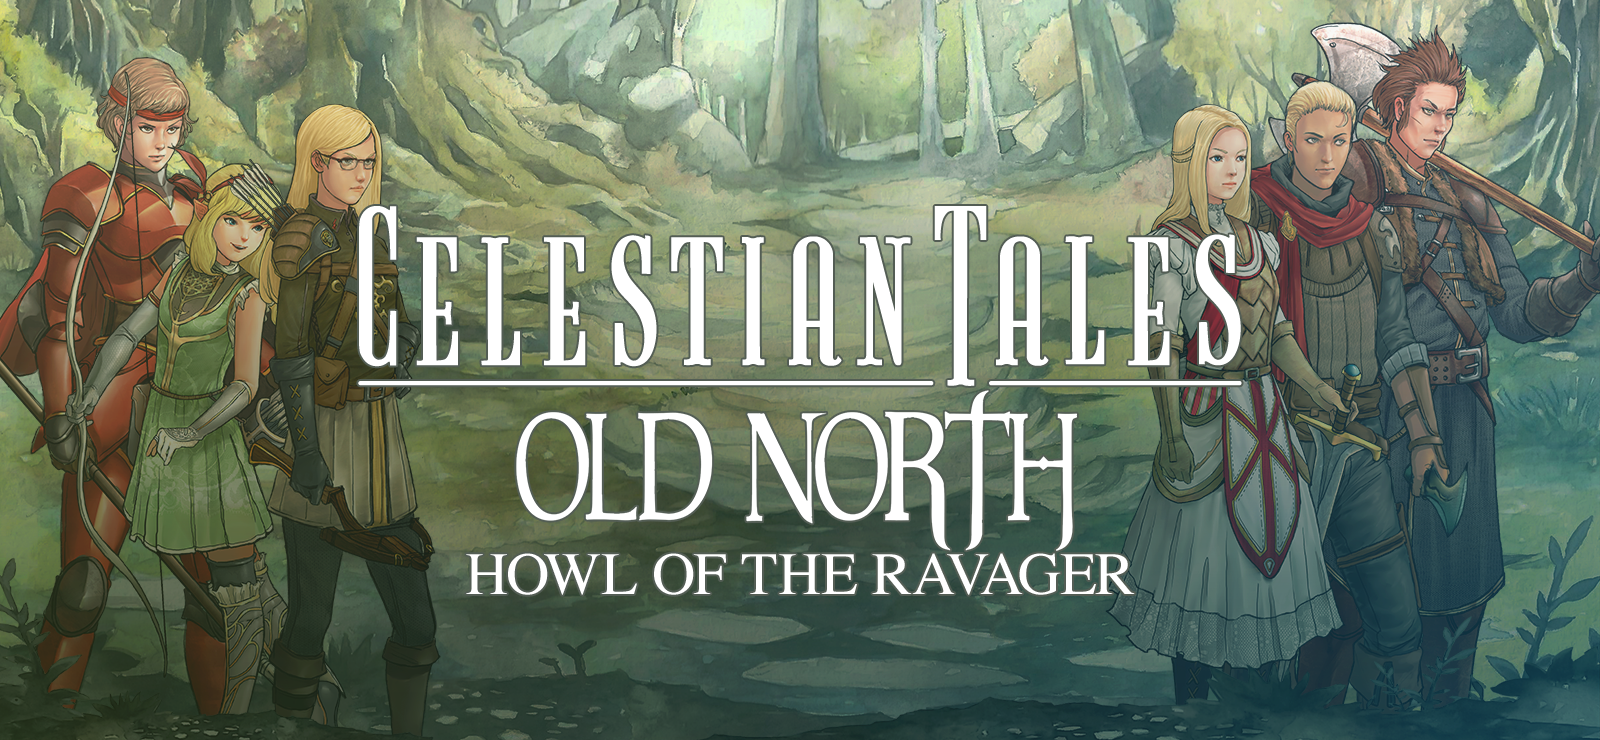 Celestian Tales: Old North - Howl Of The Ravager